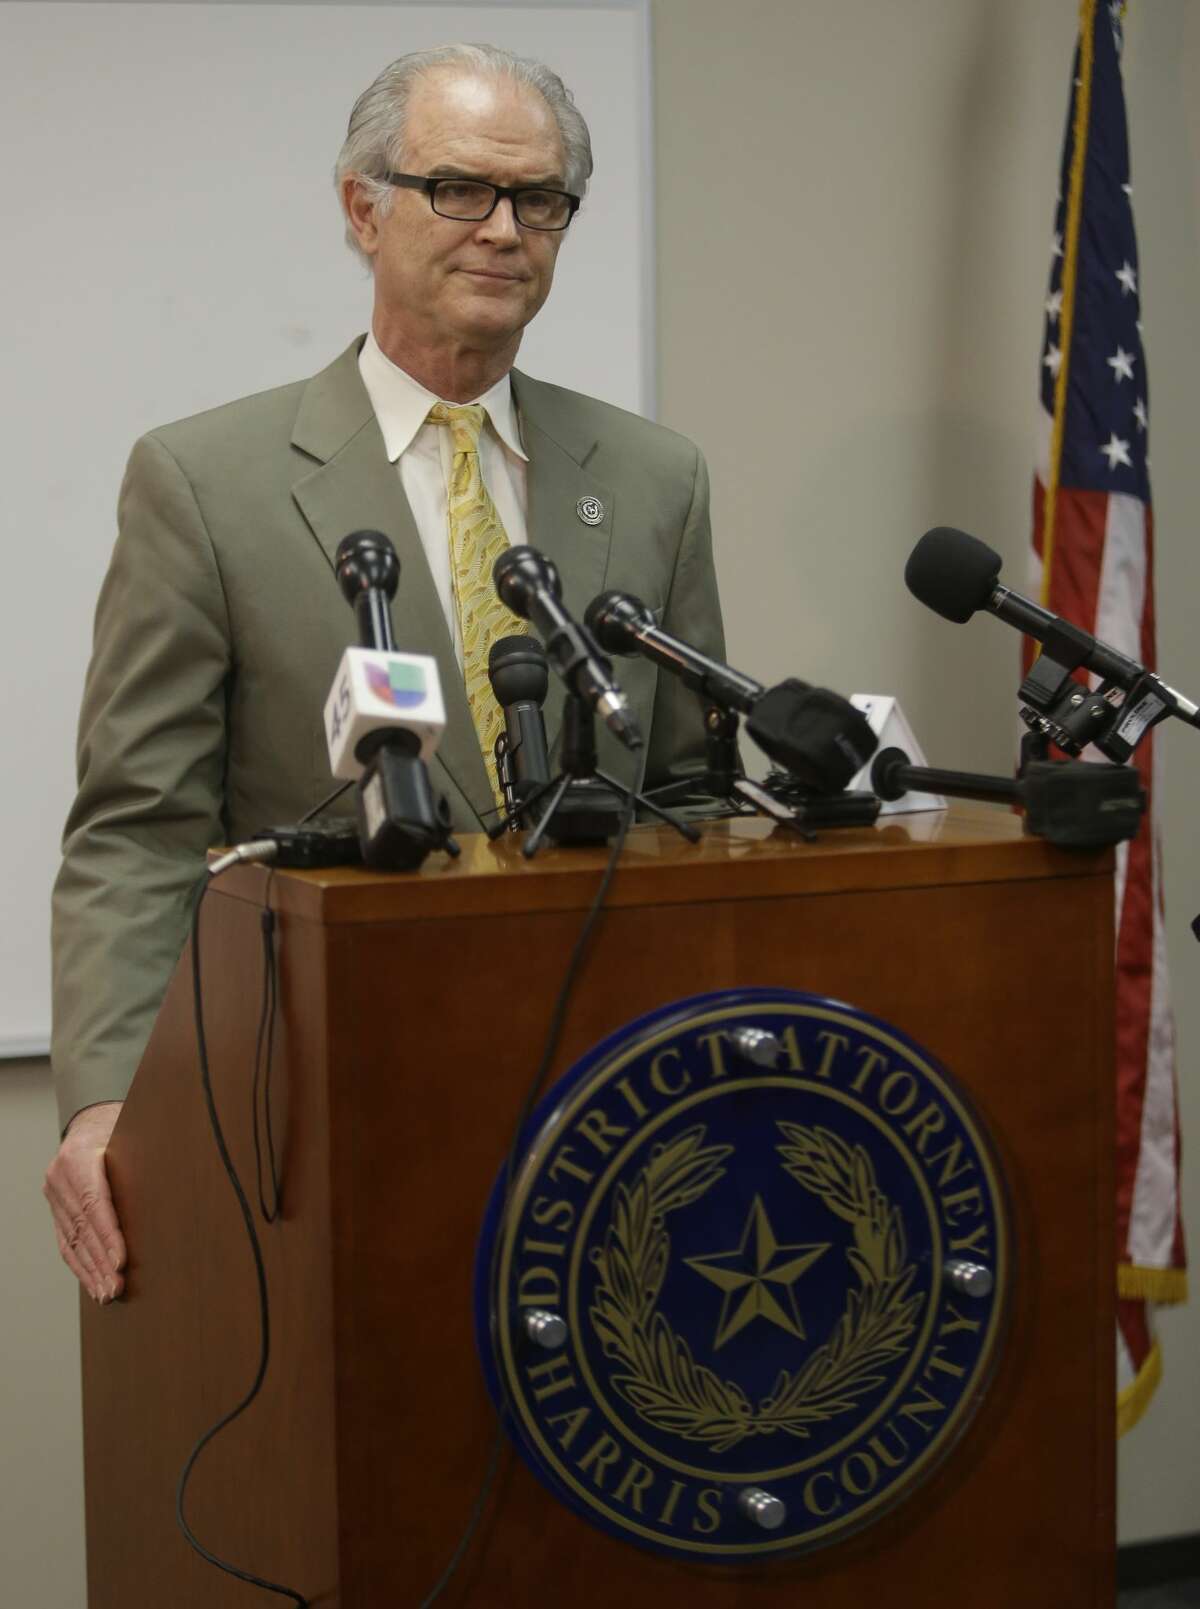 David Mitcham, trial bureau chief with the Harris County District Attorney's Office, speaks to the media about an audit at the Houston Forensic Center shown Wednesday, April 12, 2017, in Houston. ( Melissa Phillip / Houston Chronicle )